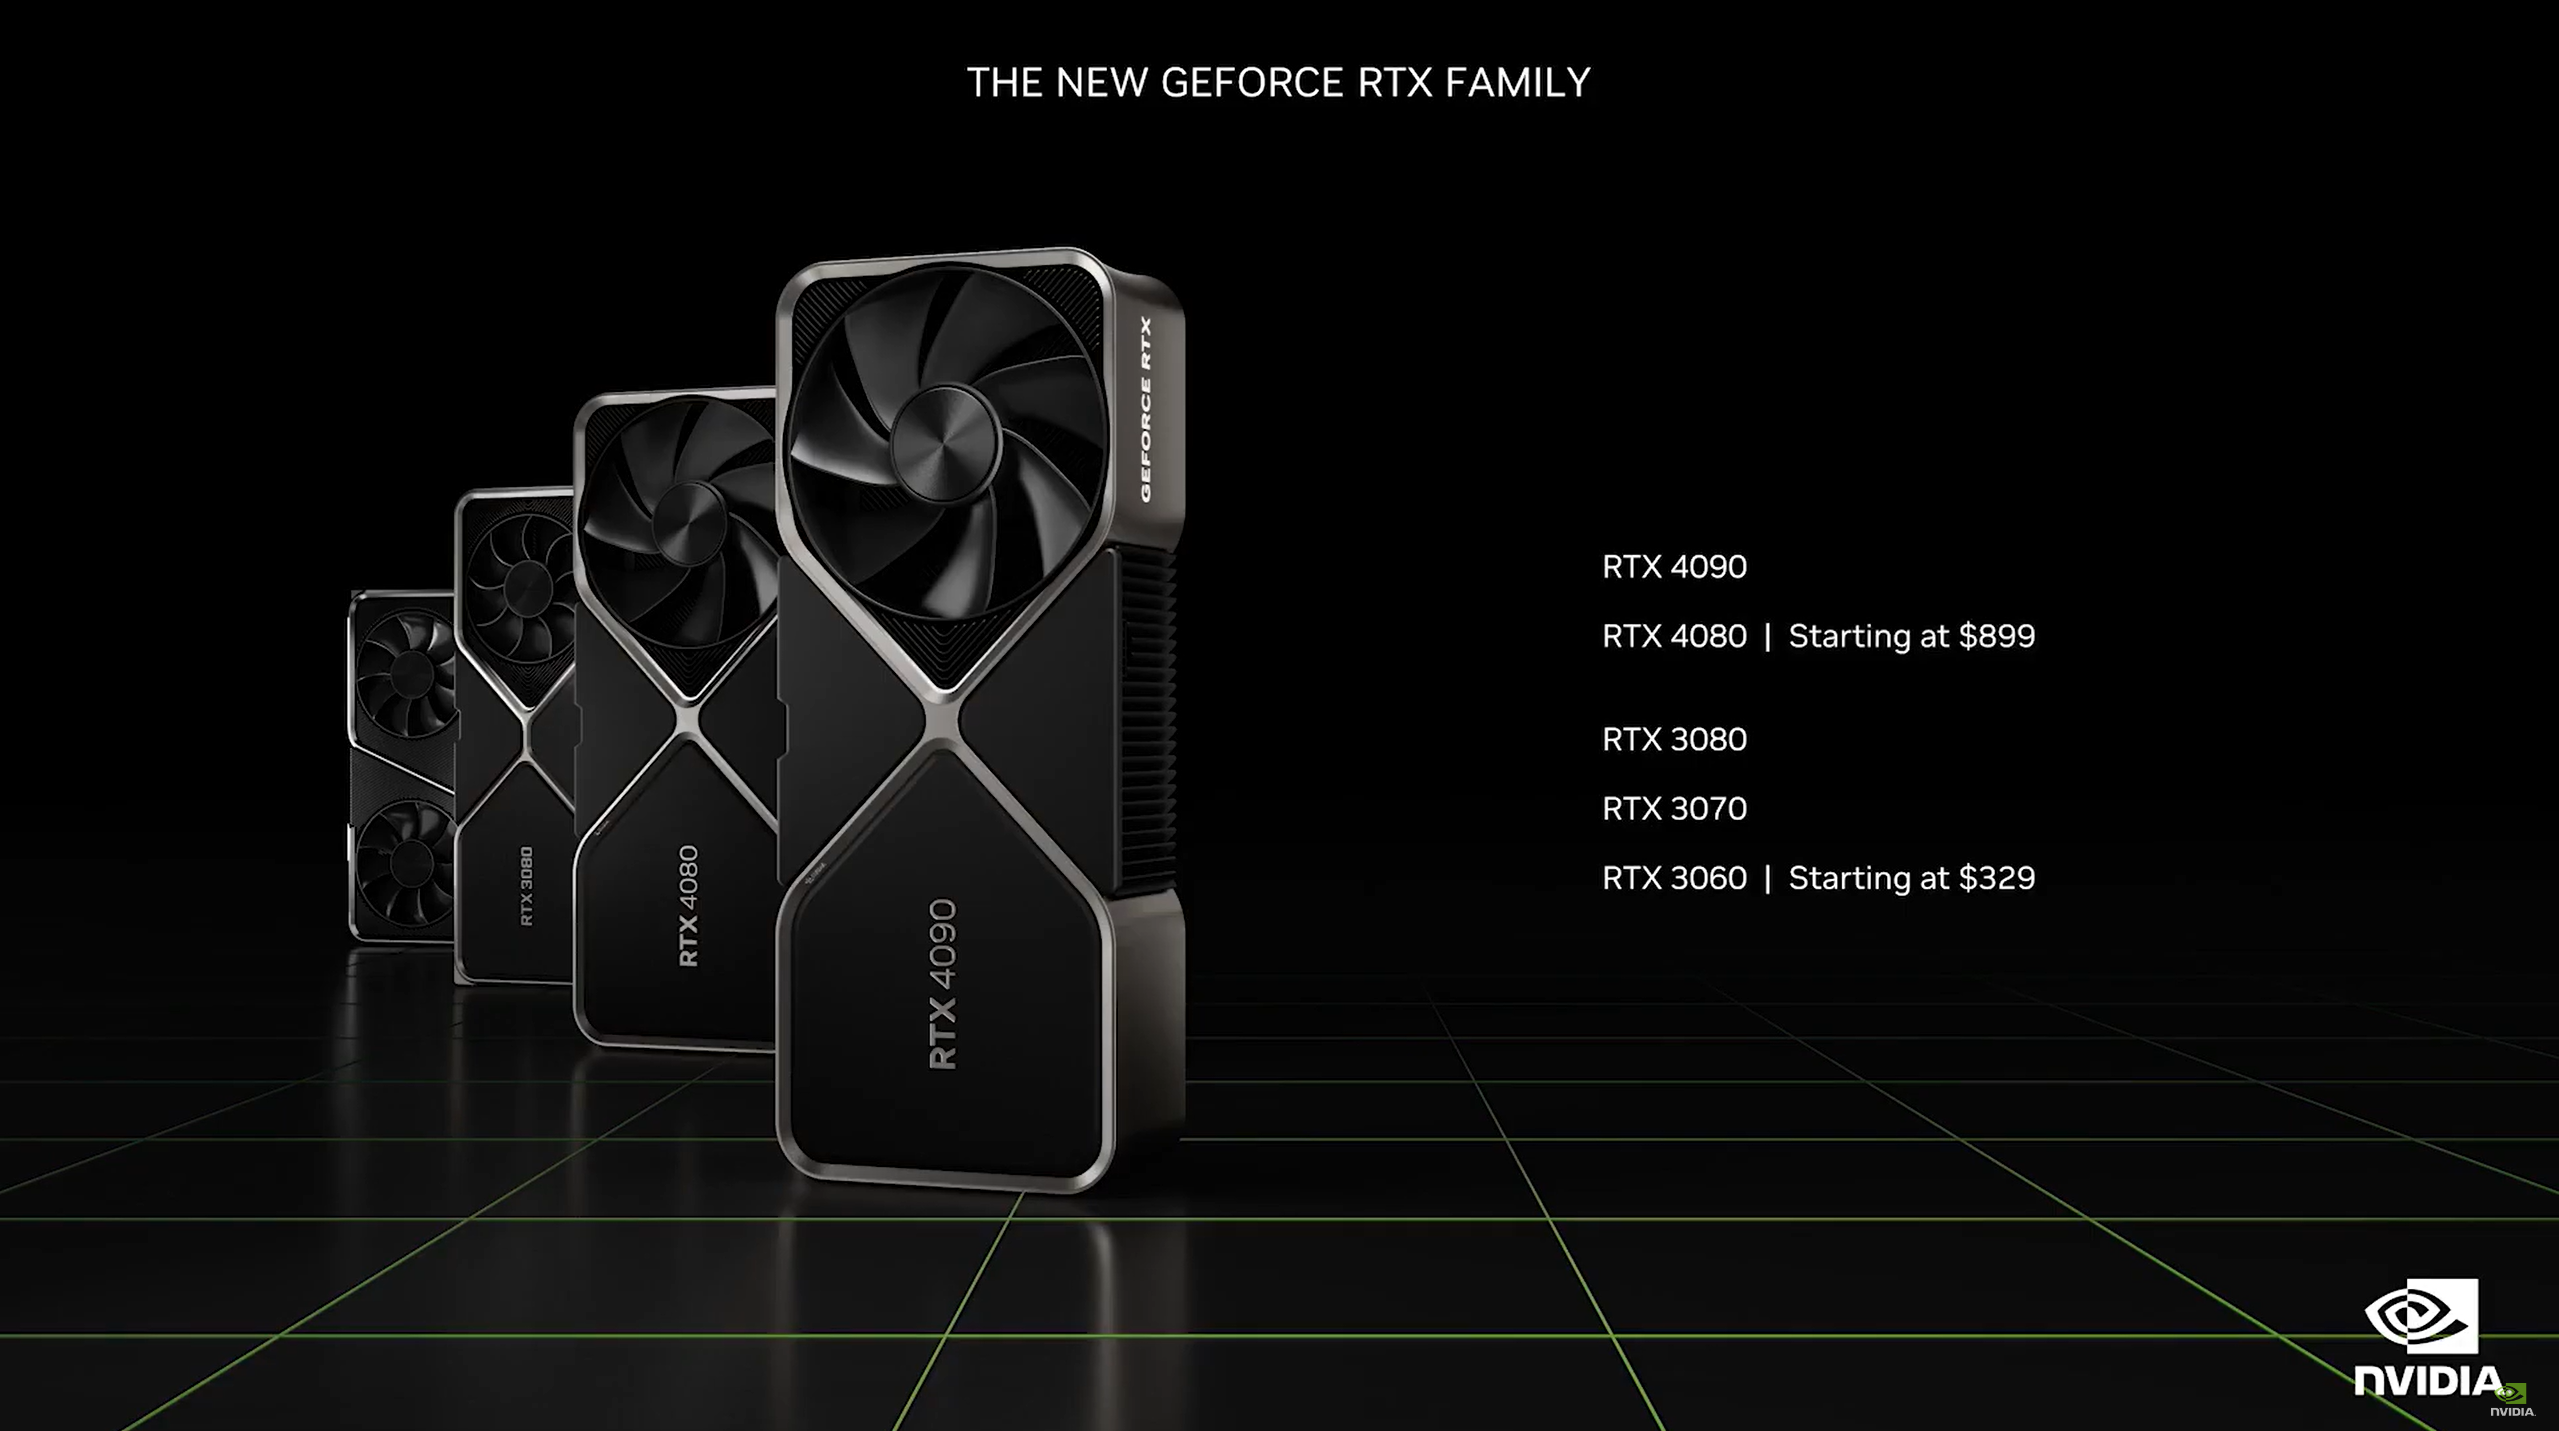 nvidia rtx 4000 series: release date, price and specs